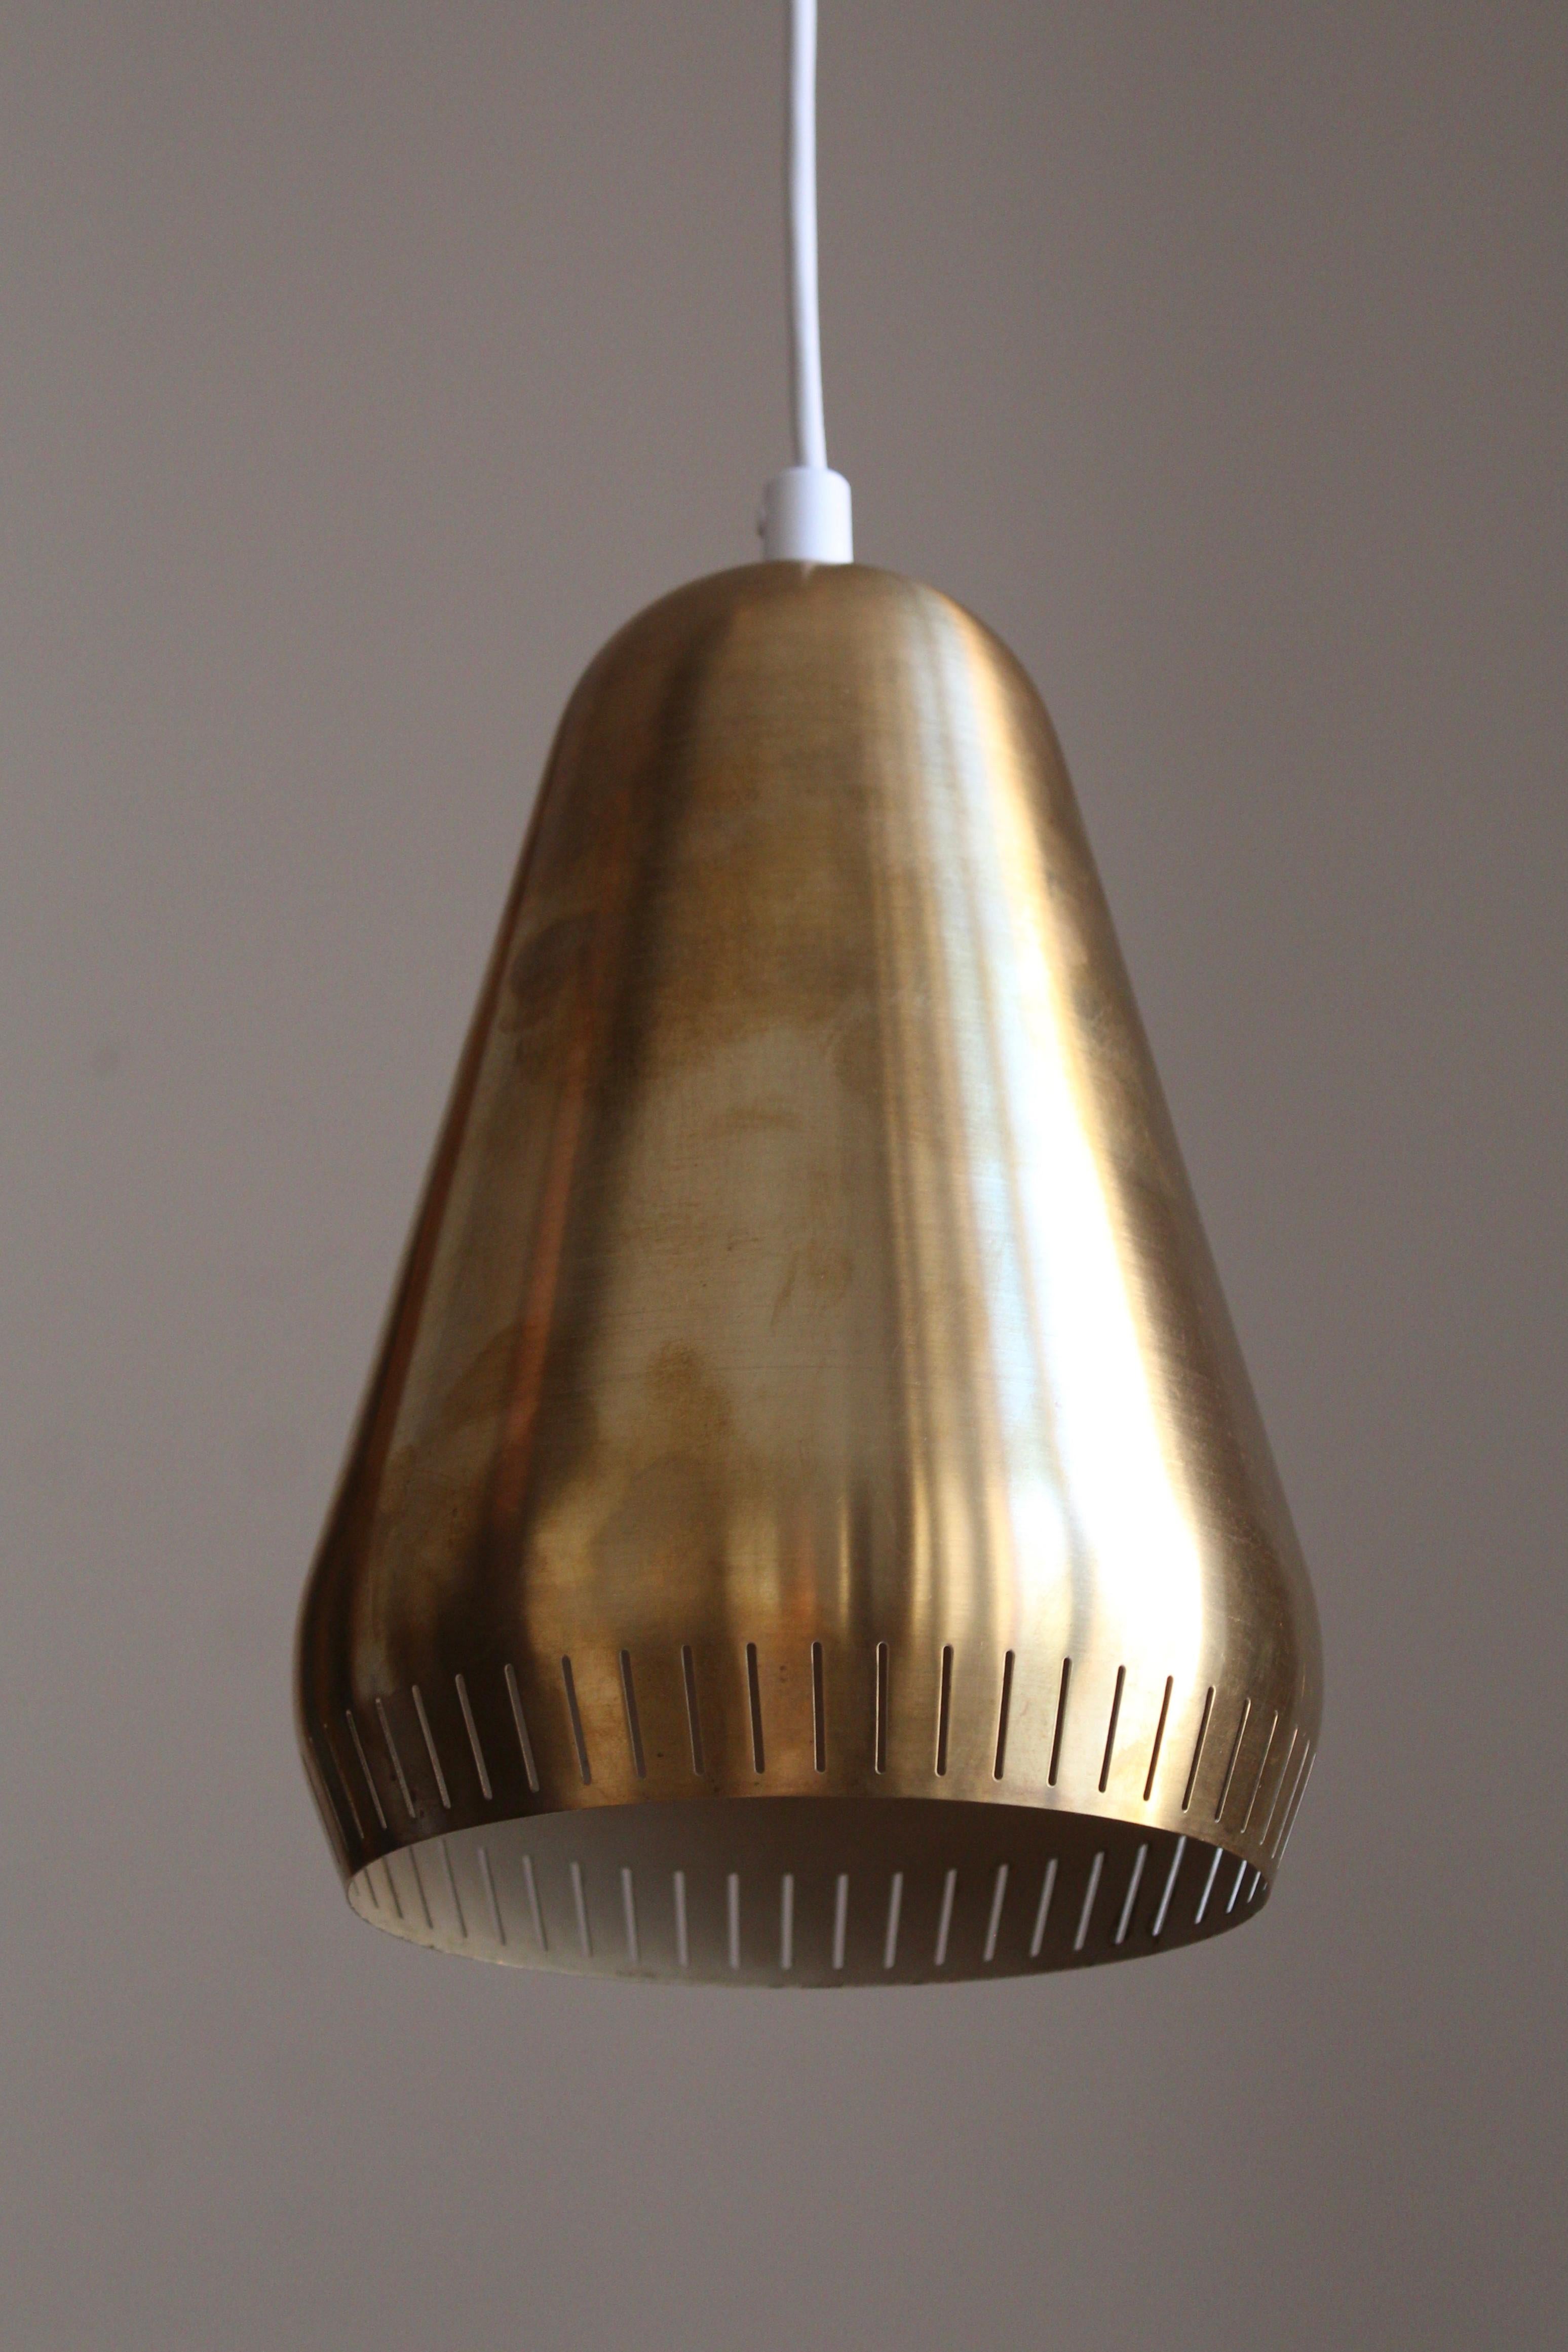 A pendant light / ceiling lamp. Designed and produced in Sweden, c. 1950s.